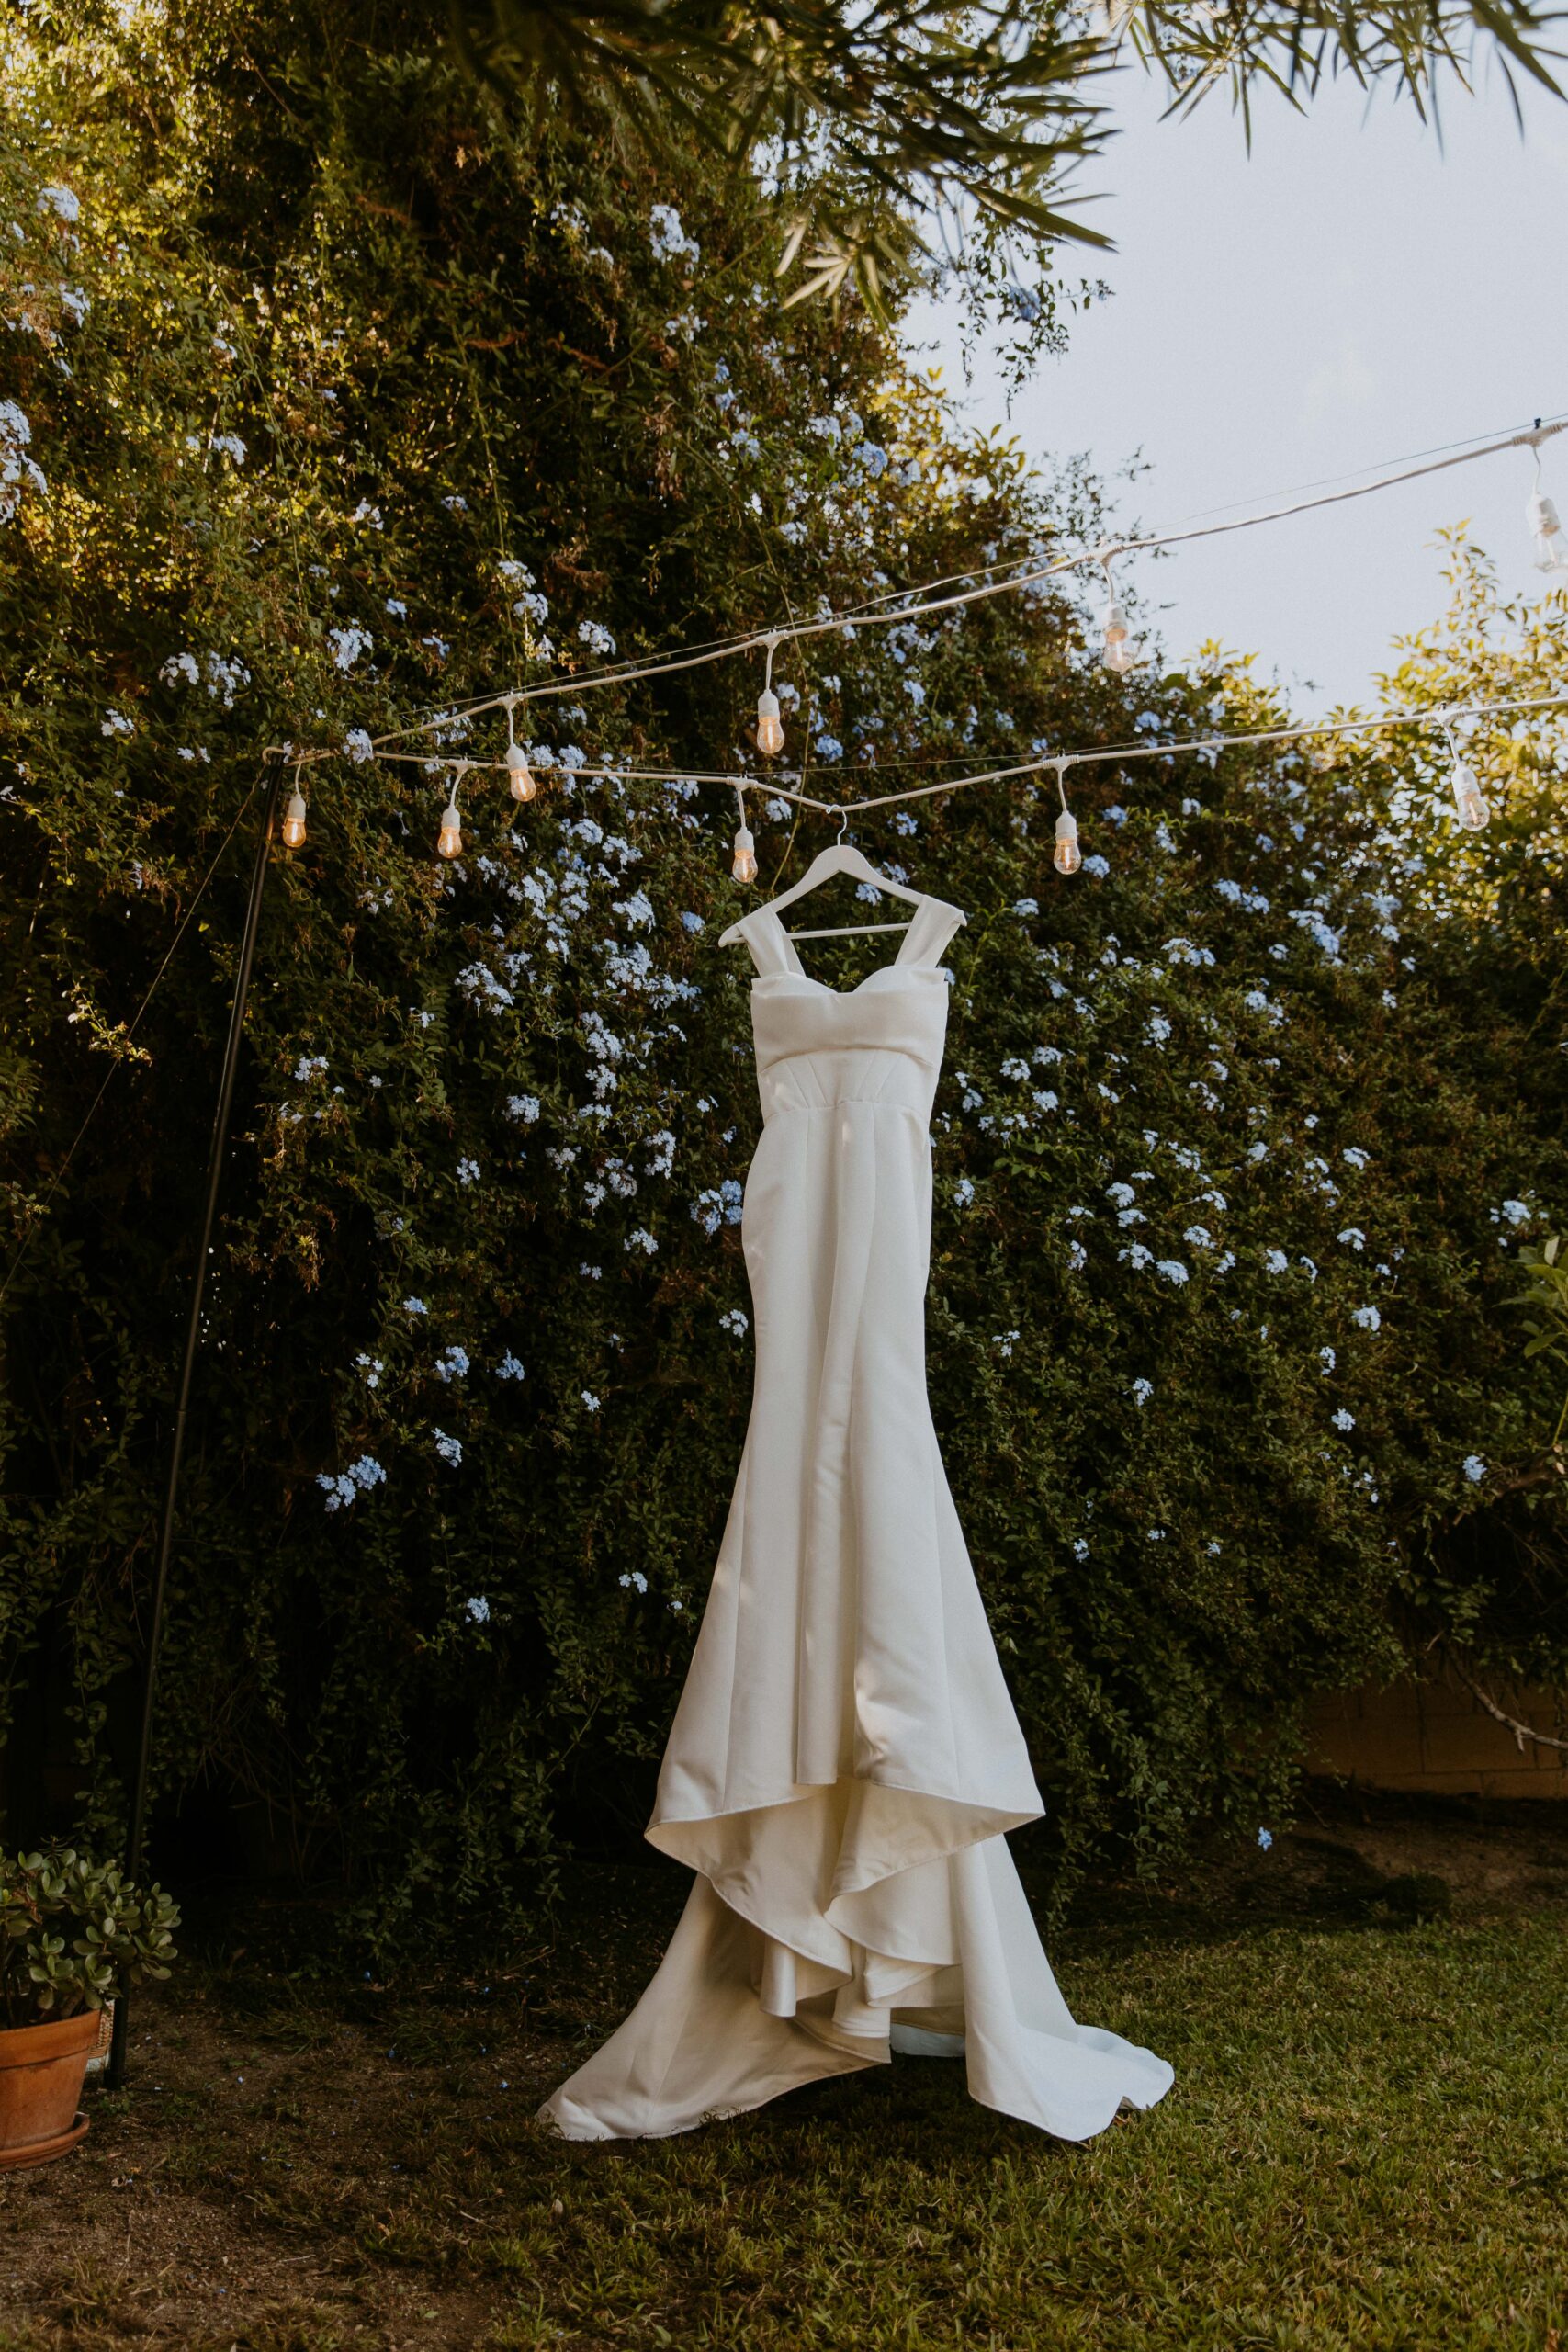 A wedding dress hanging from a string of lights amidst greenery.